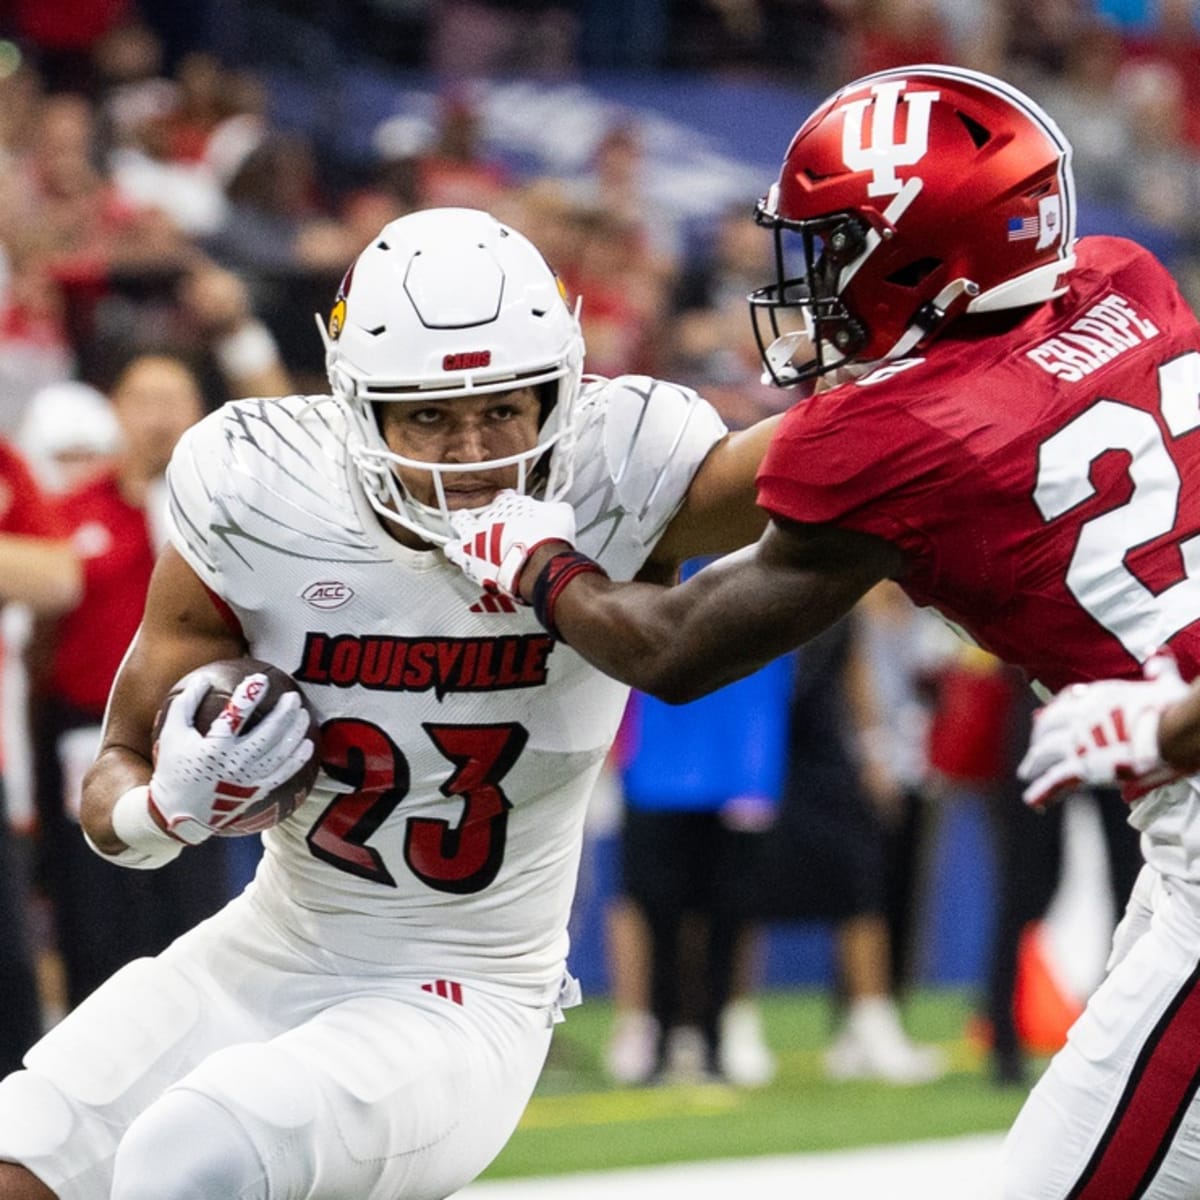 Louisville uses fast start, late goal-line stand to hold off Indiana 21-14